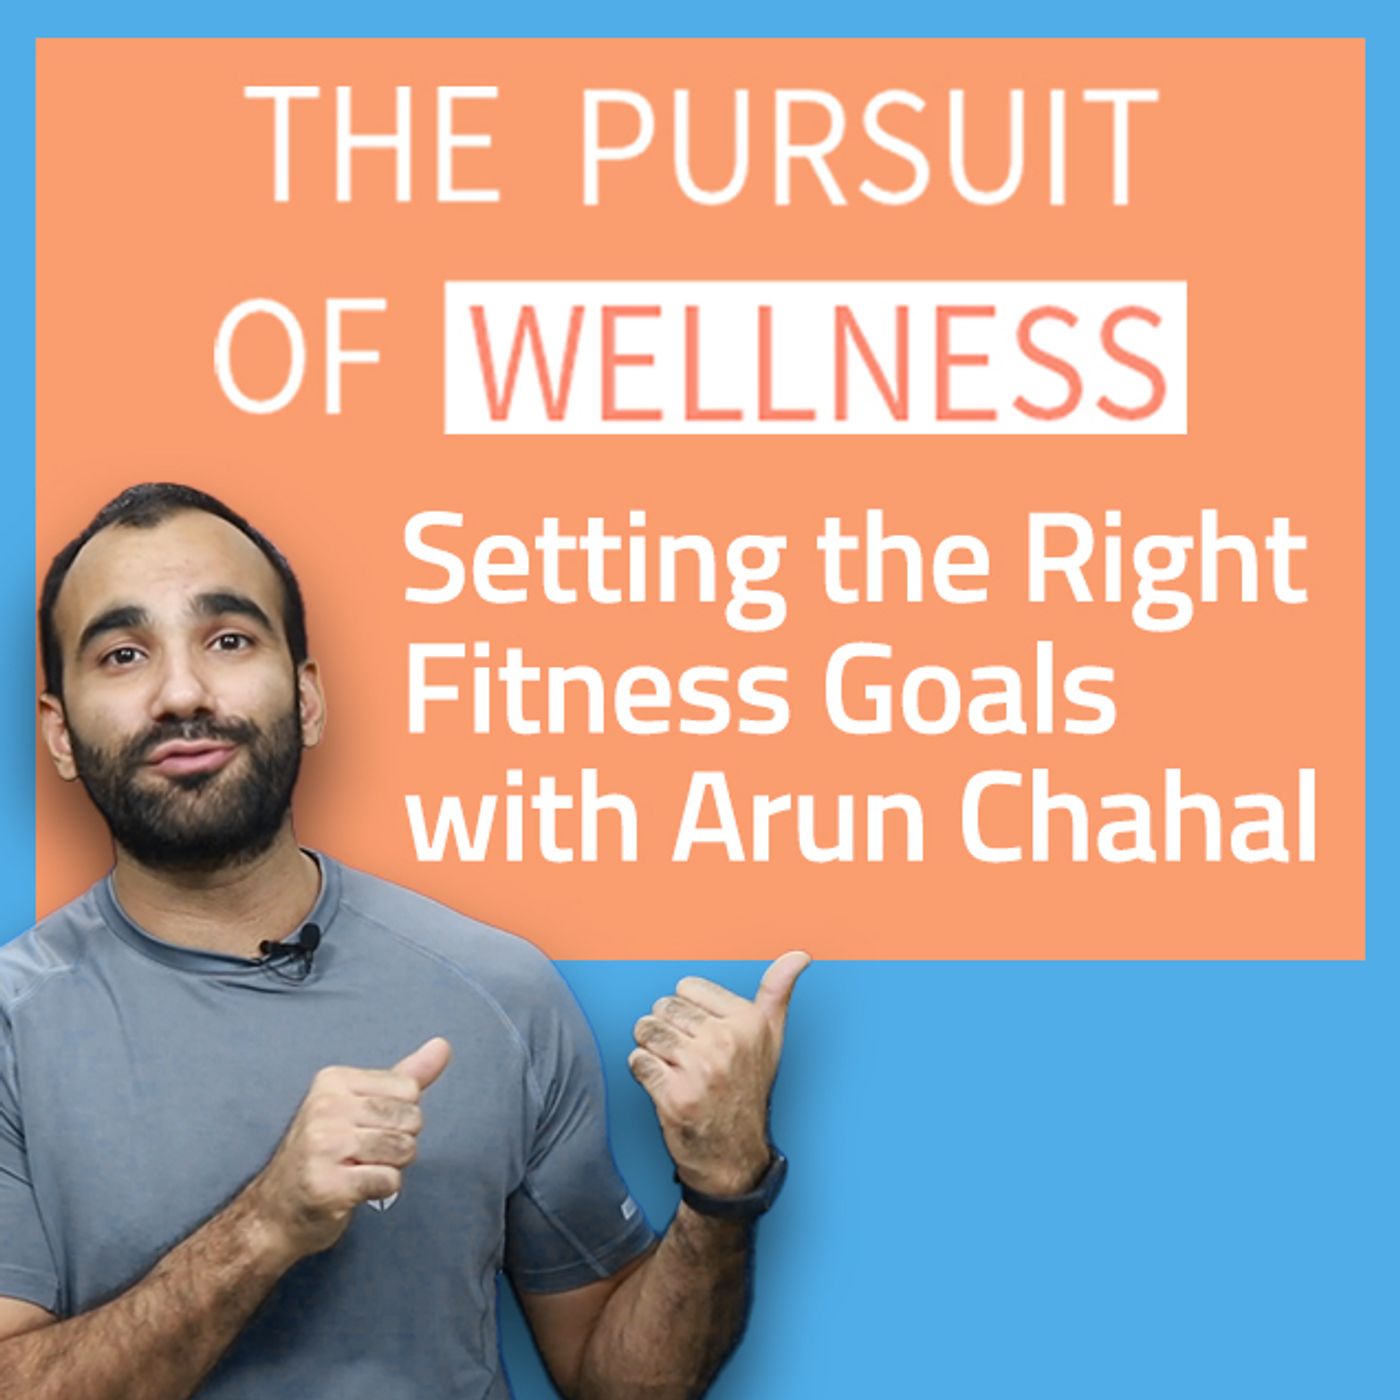 S2 Ep9: "Setting the Right Fitness Goals" with Arun Chahal